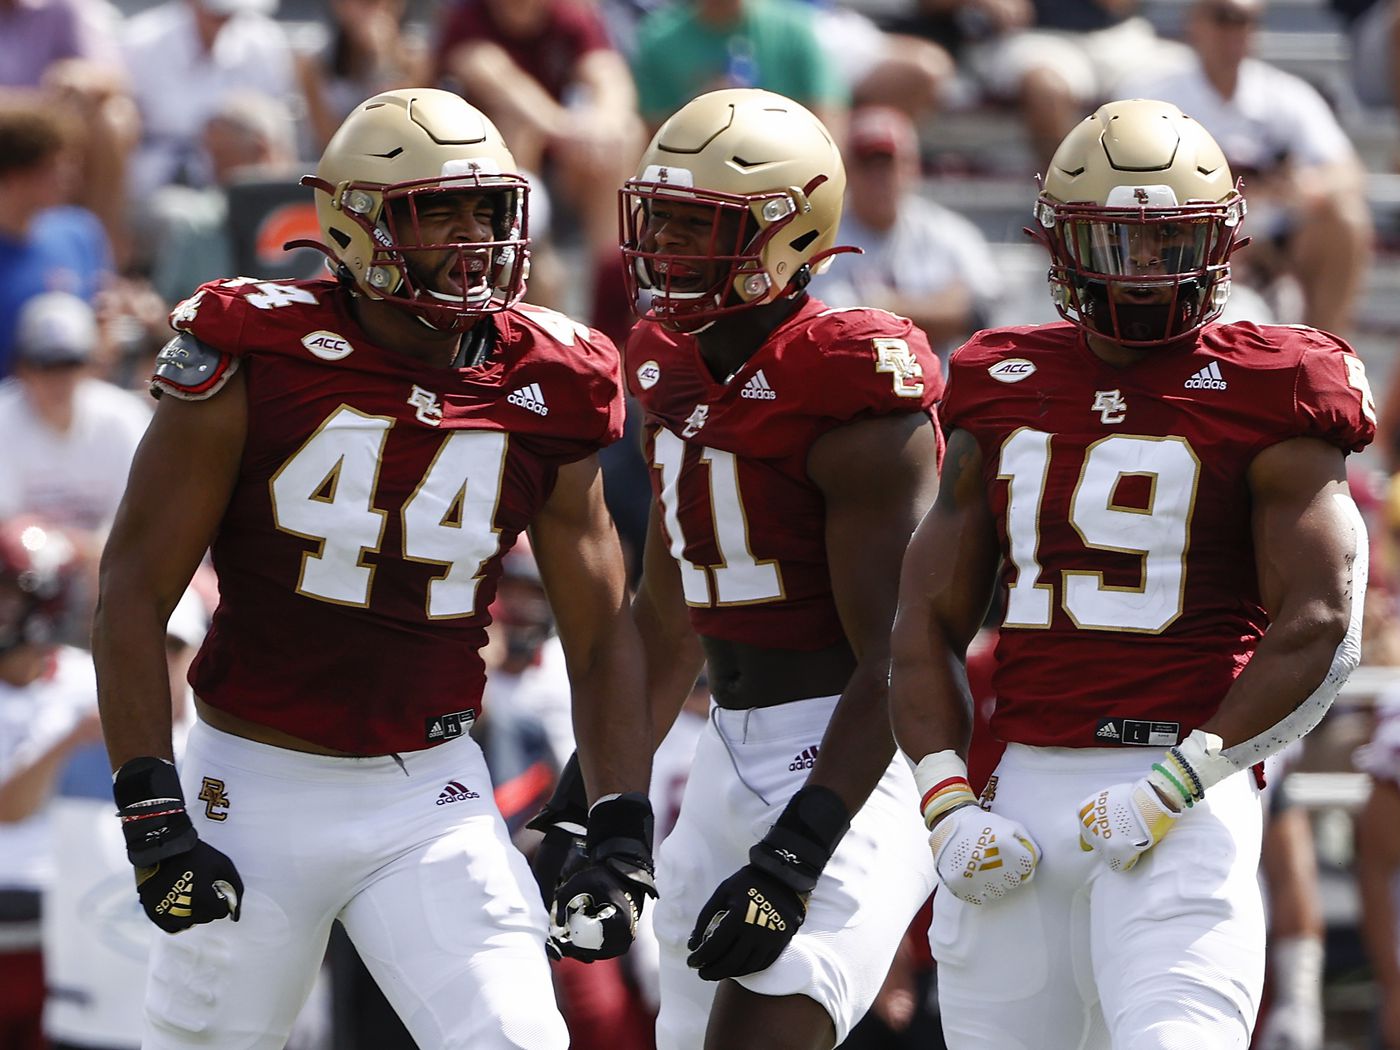 Boston College 45 Umass 28 Seven Reasons For Optimism After A Topsy-turvy Day - Bc Interruption